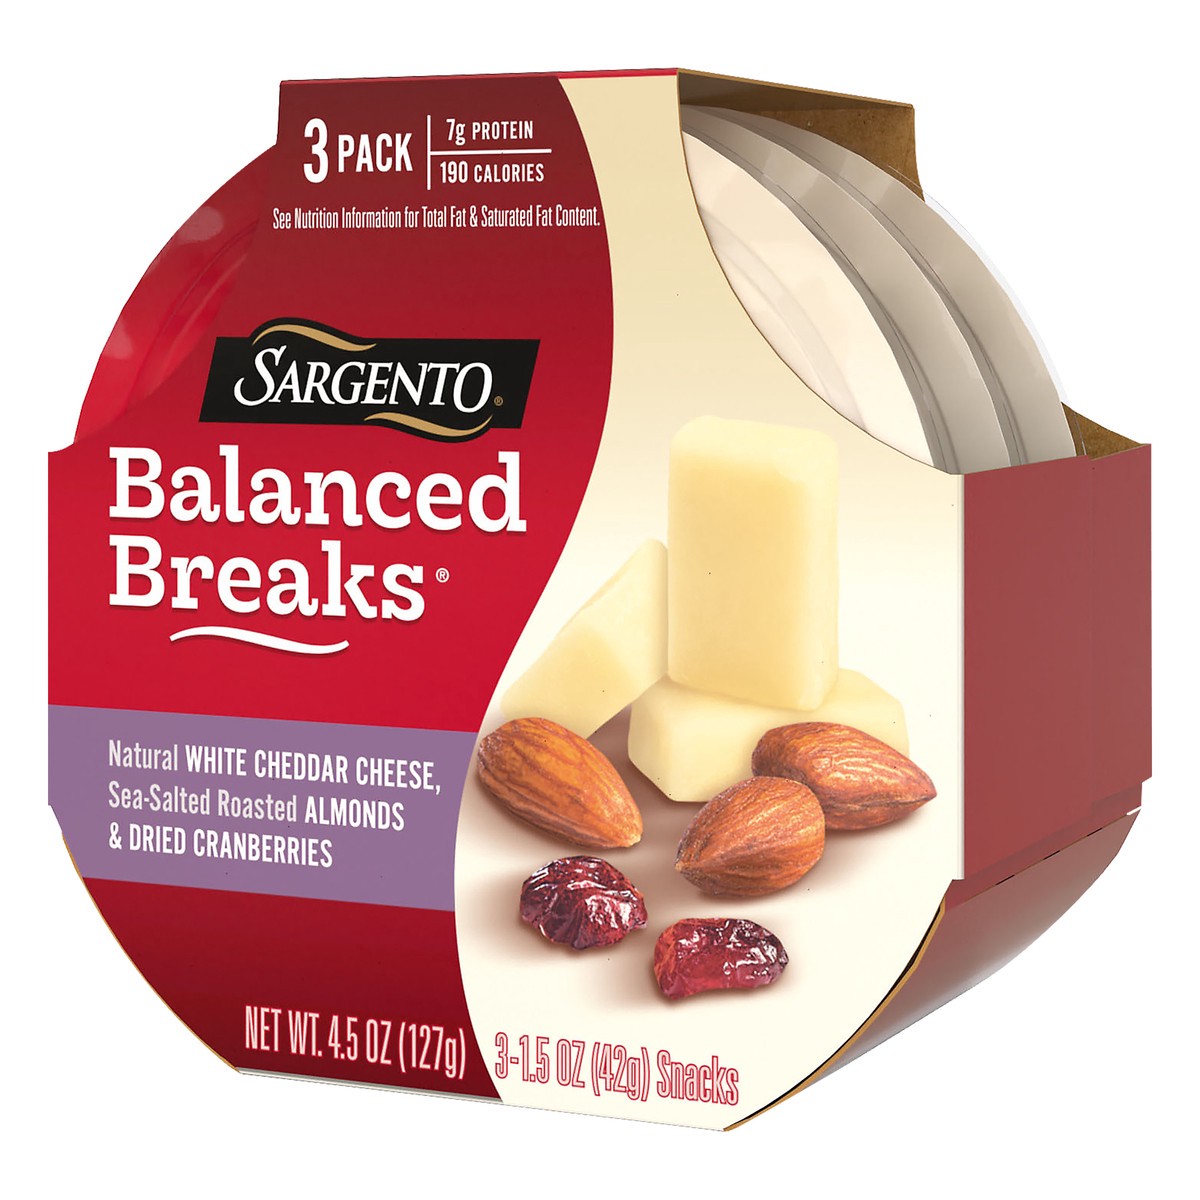 slide 3 of 9, Sargento Balanced Breaks Natural White Cheddar, Sea-Salted Roasted Almonds & Dried Cranberries - 4.5oz/3ct, 